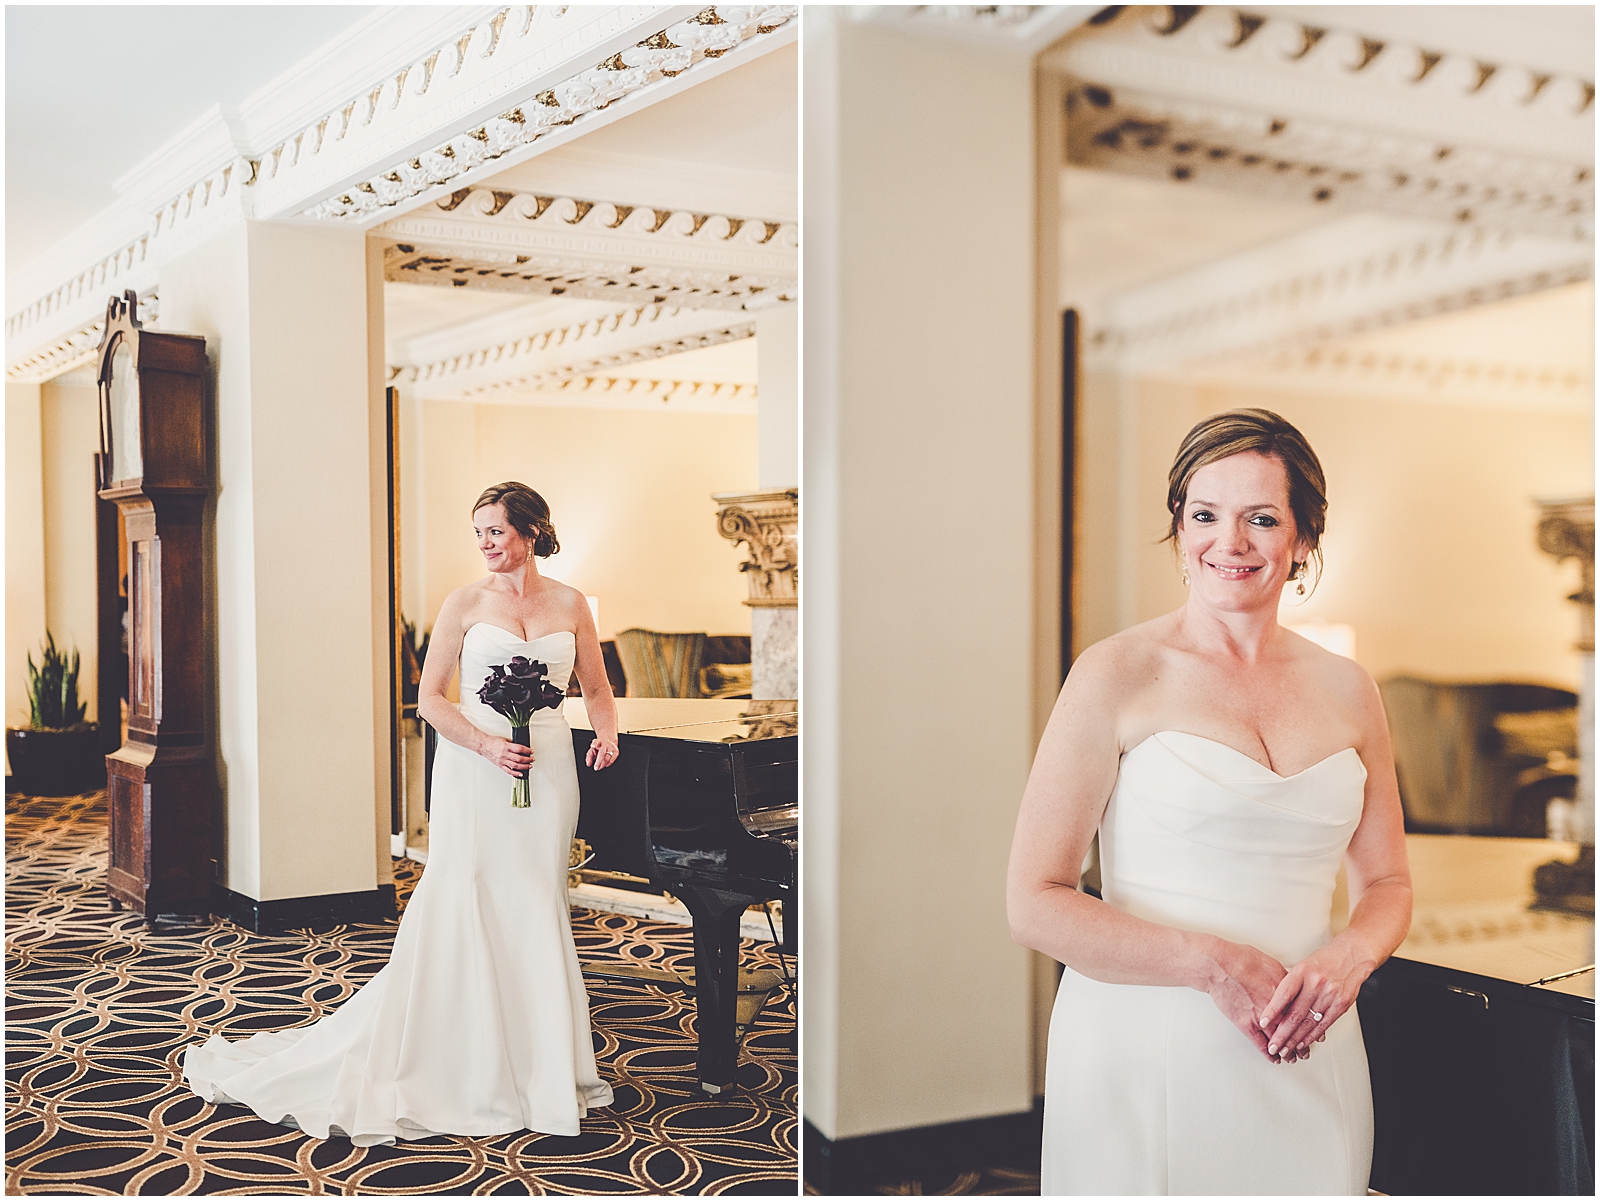 Annie and Virgil's wedding at The Seelbach Hilton in Louisville, Kentucky with Chicagoland wedding photographer Kara Evans Photographer.